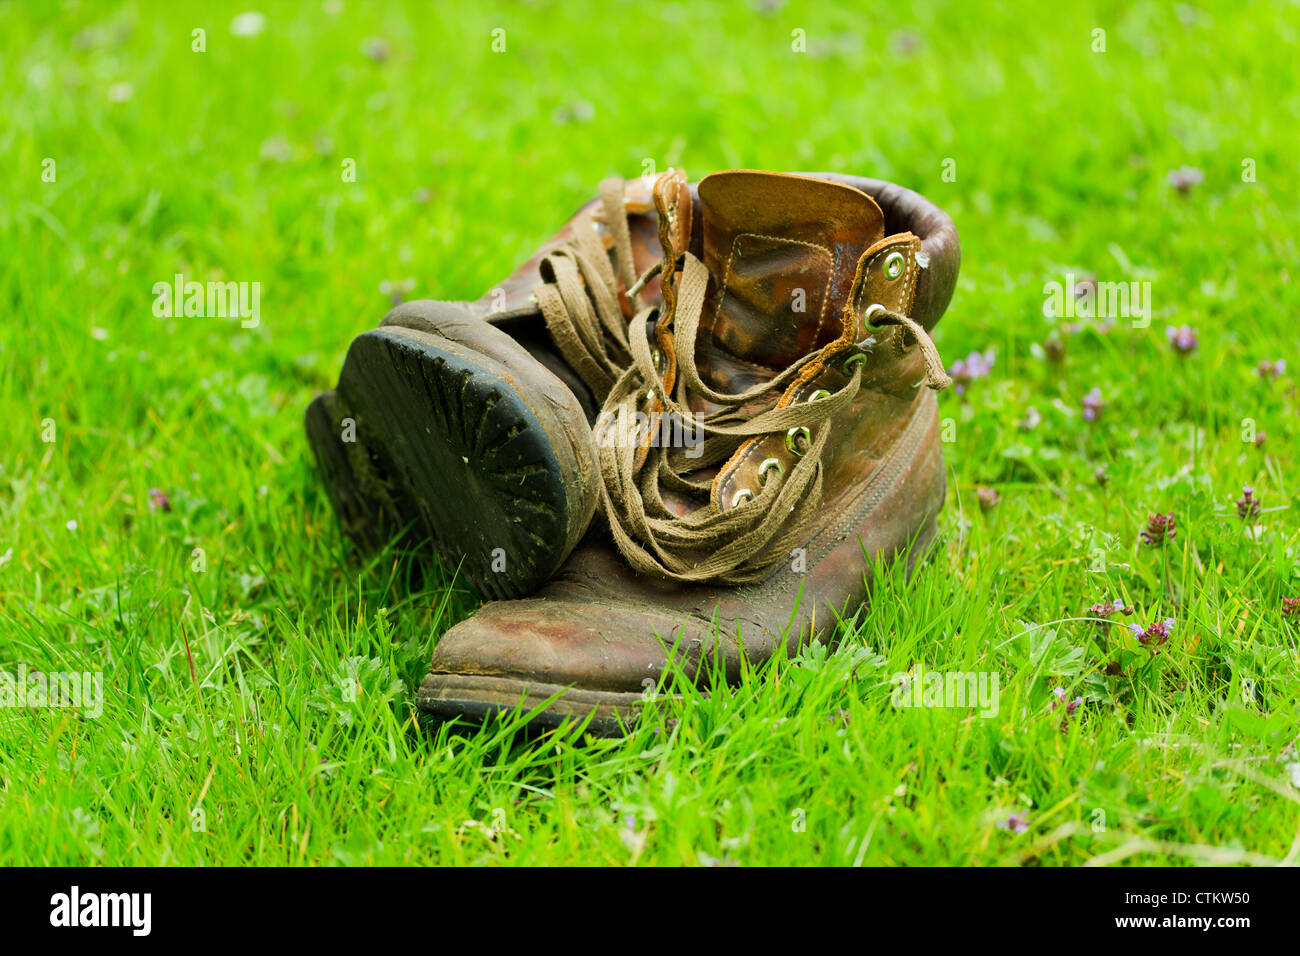 Pair of old worn boots in the grass Stock Photo